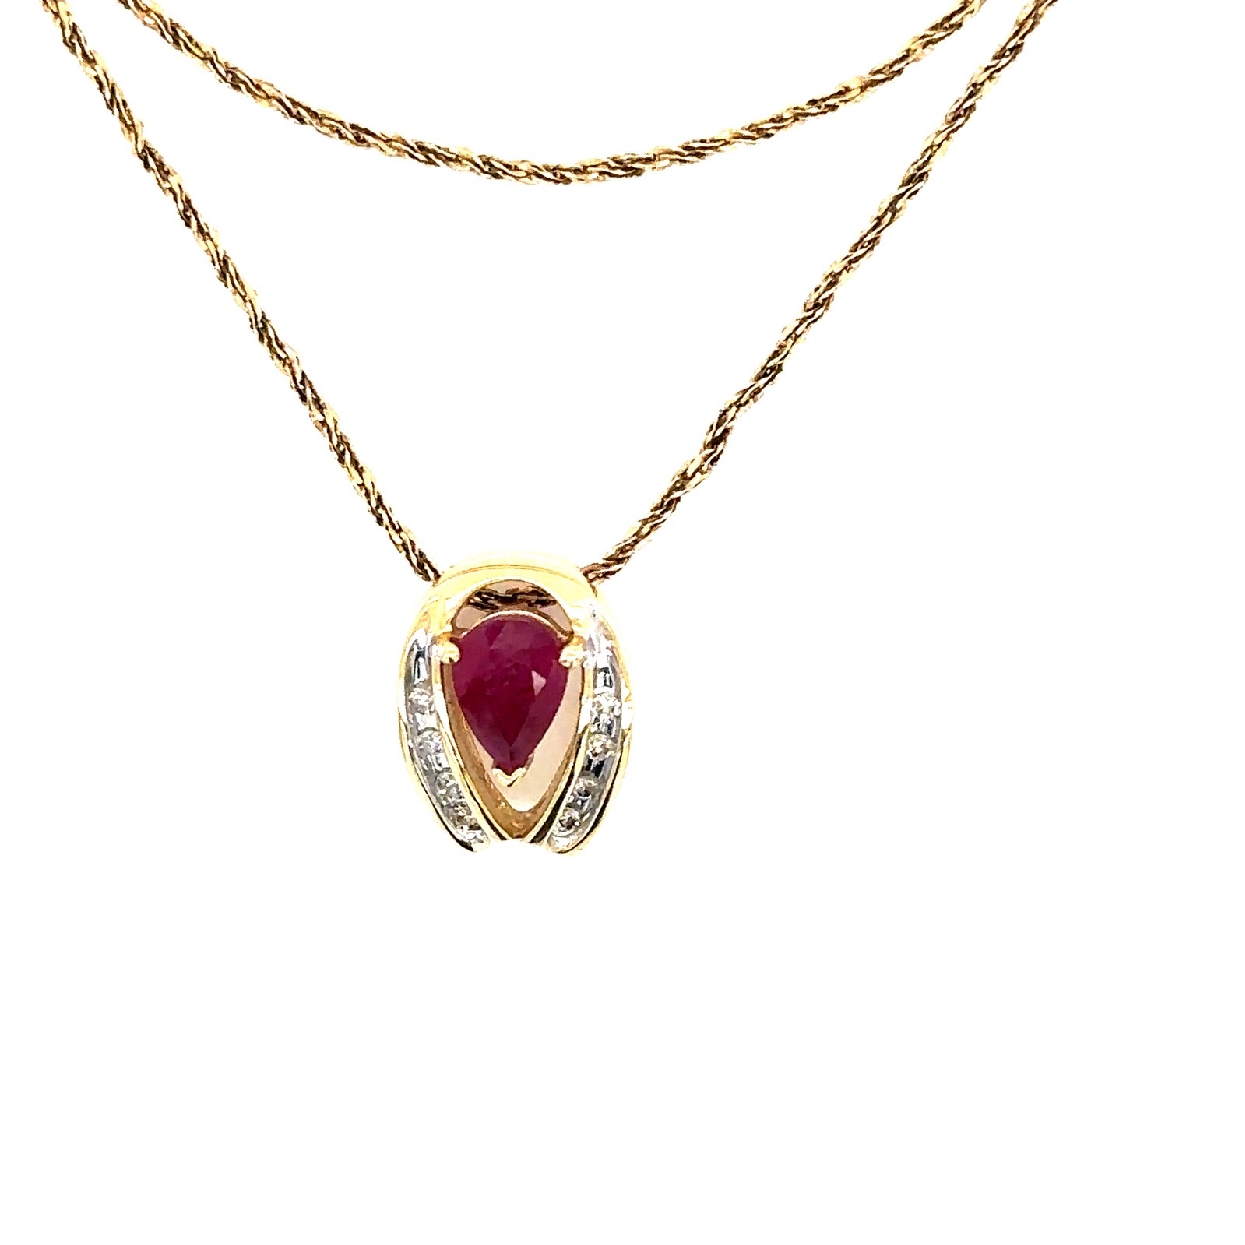 14K Yellow Gold Necklace with Ruby Diamond Slide Pendant 

21 Inches 